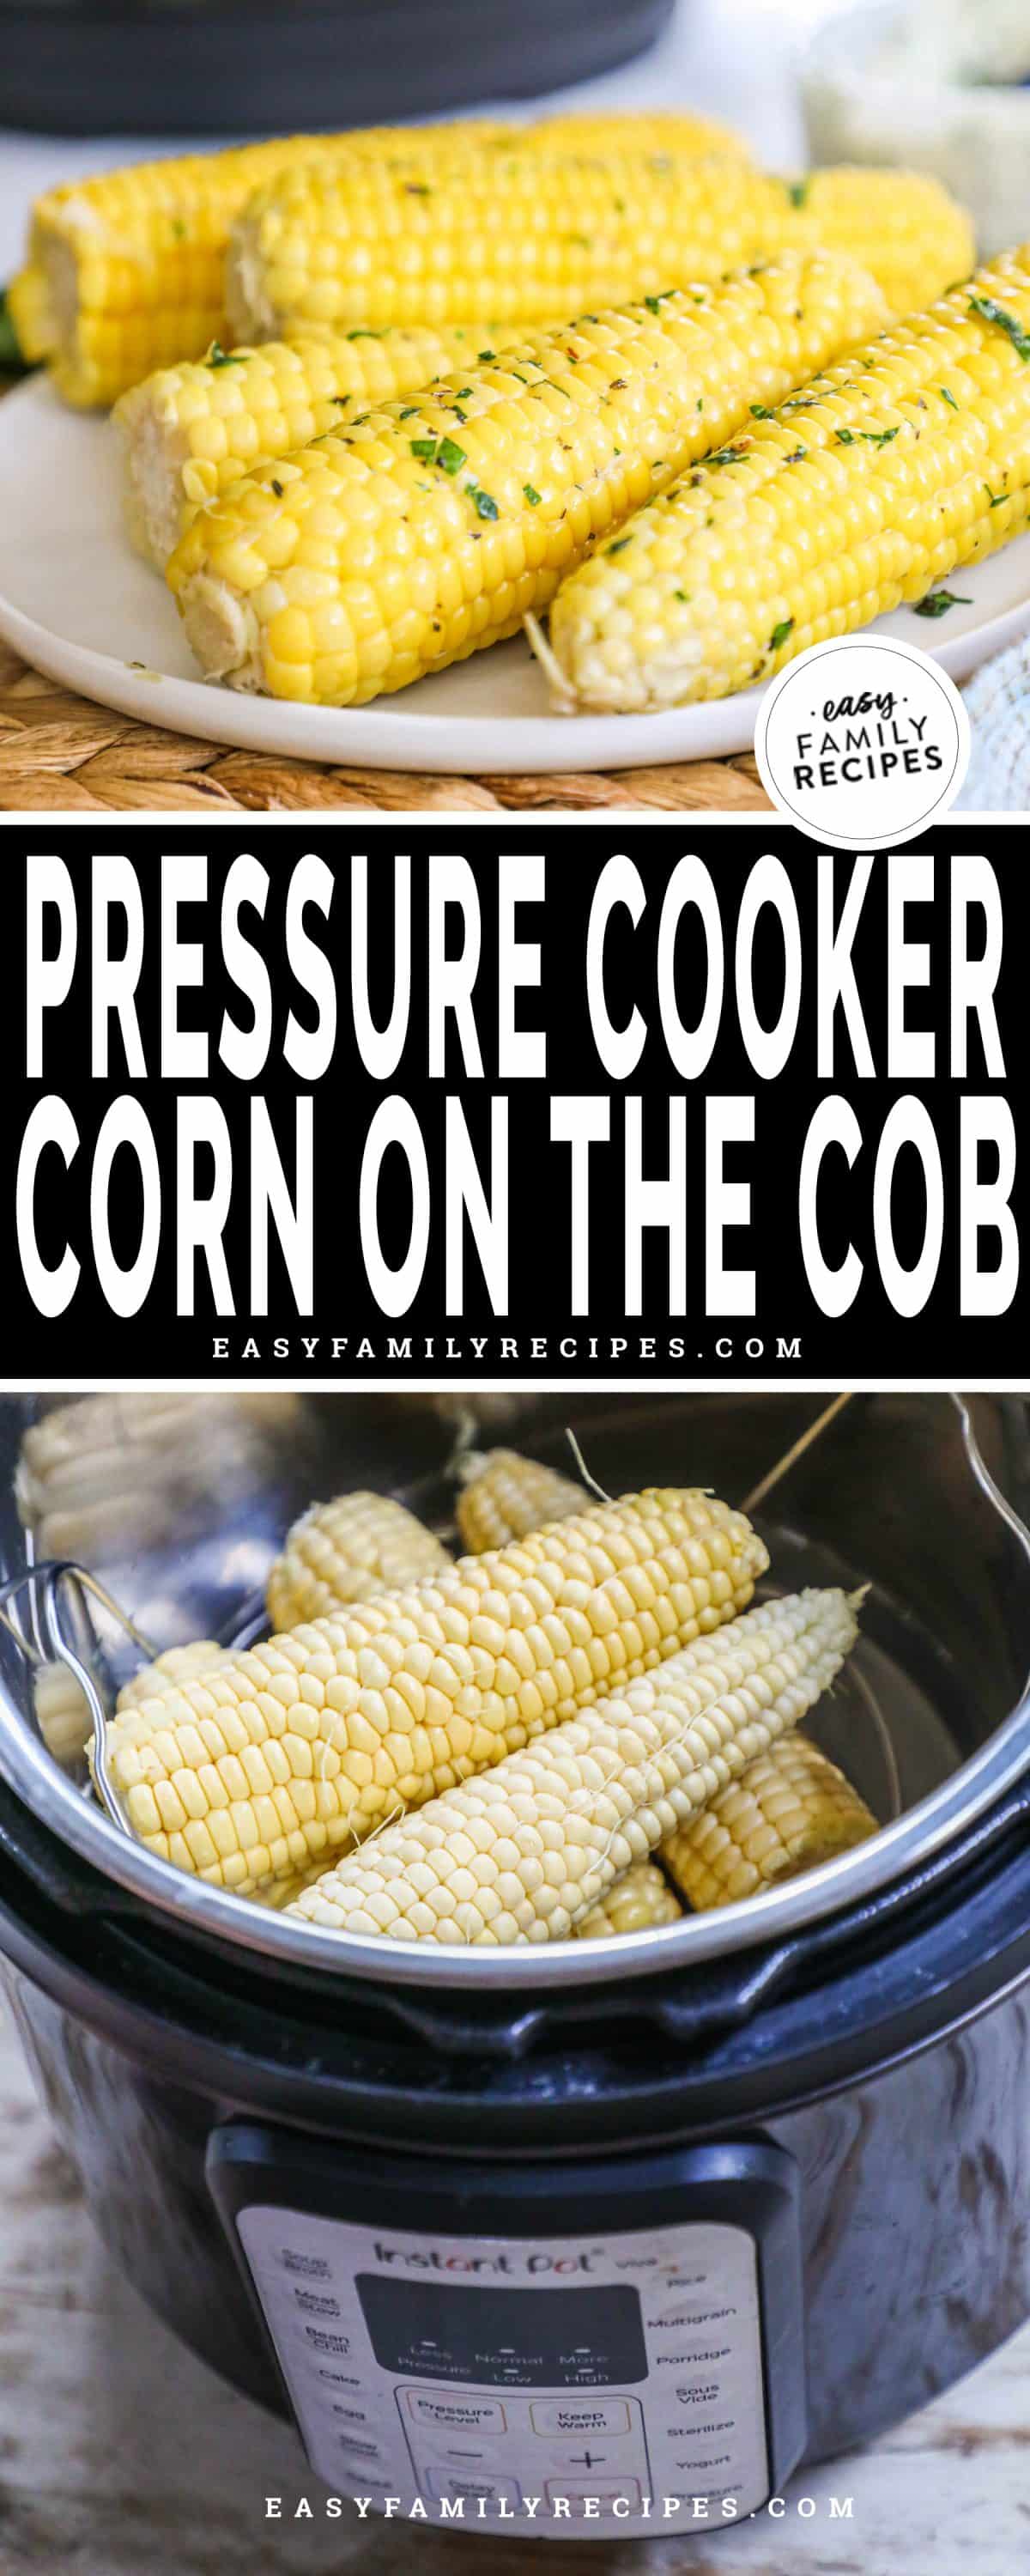 Corn on the cob on a plate and corn on the cob in the Instant Pot.